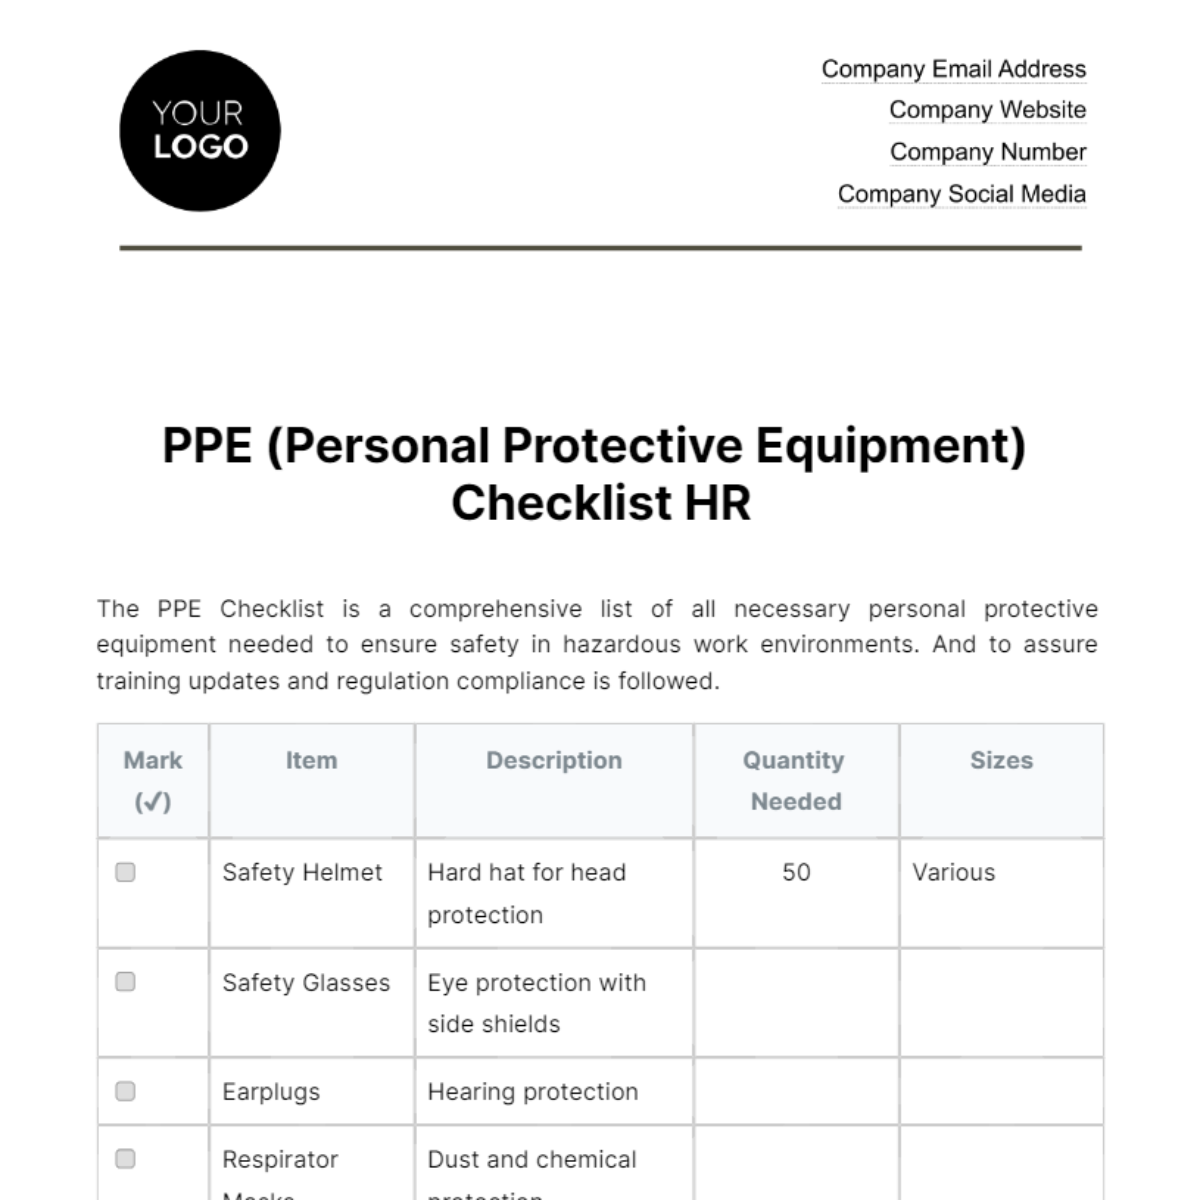 PPE (Personal Protective Equipment) Checklist HR Template